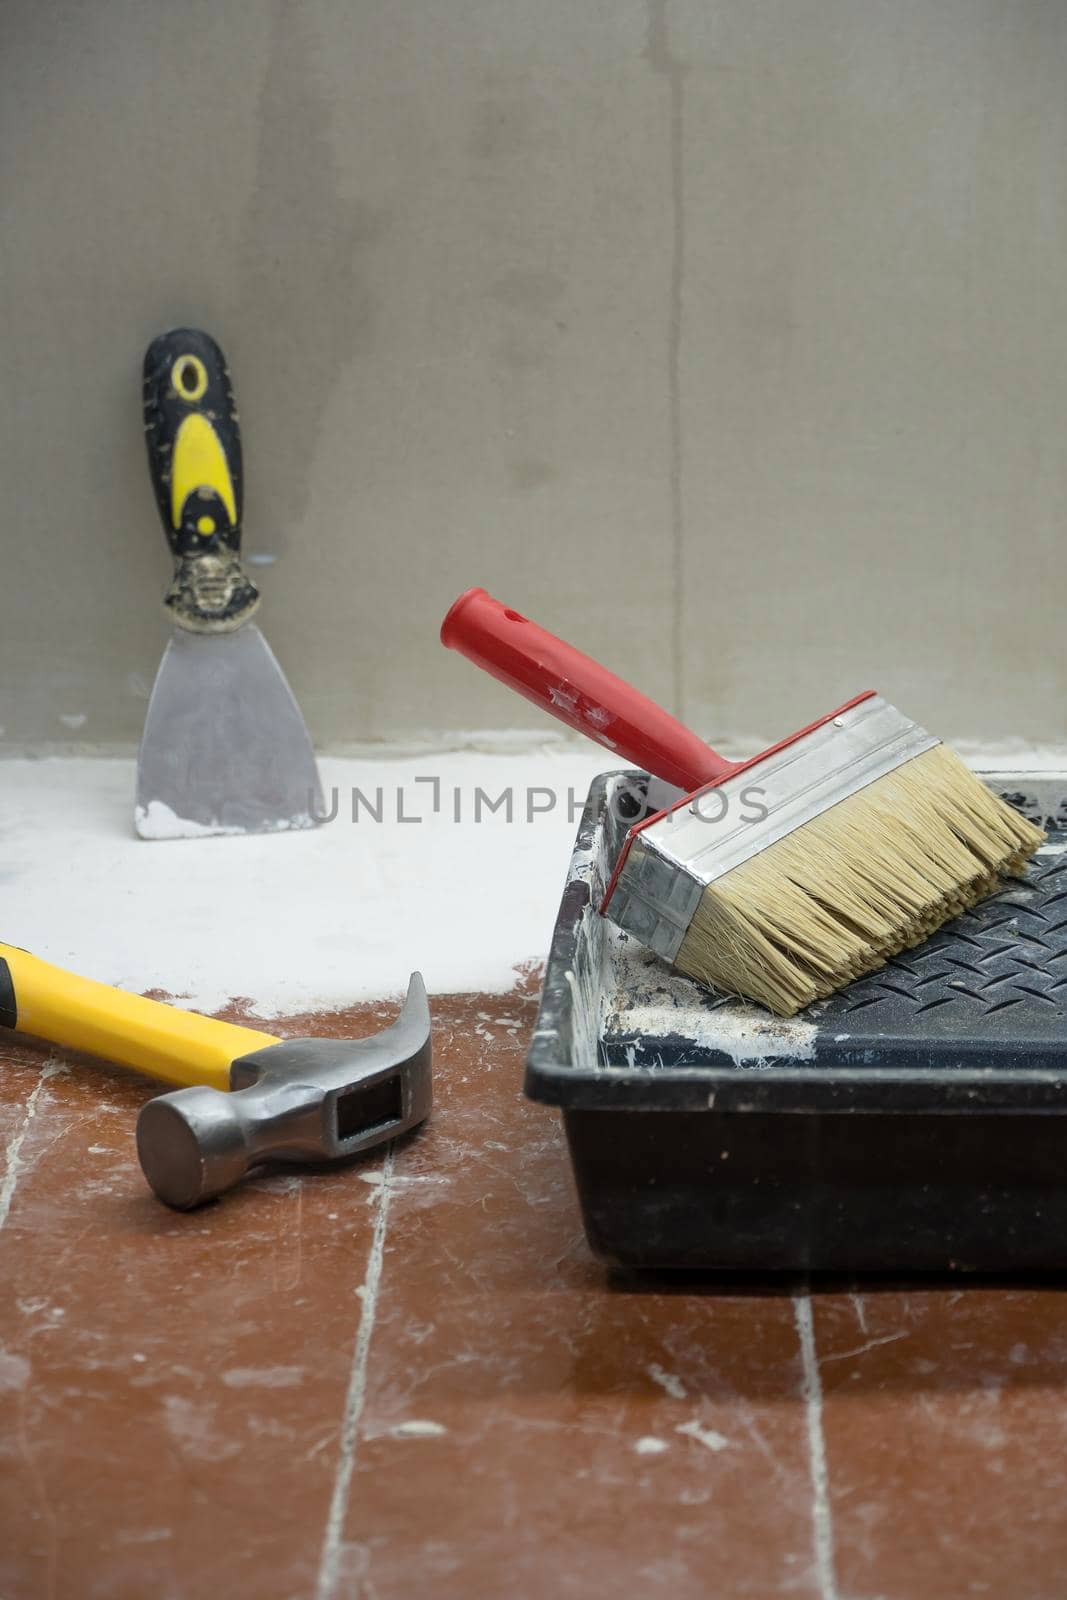 Construction and painting tools lie on the floor during the repair and restoration of the house.Work as a Builder or handyman in the house.Finishing or repairing a room.Job of repairing the apartment by YevgeniySam